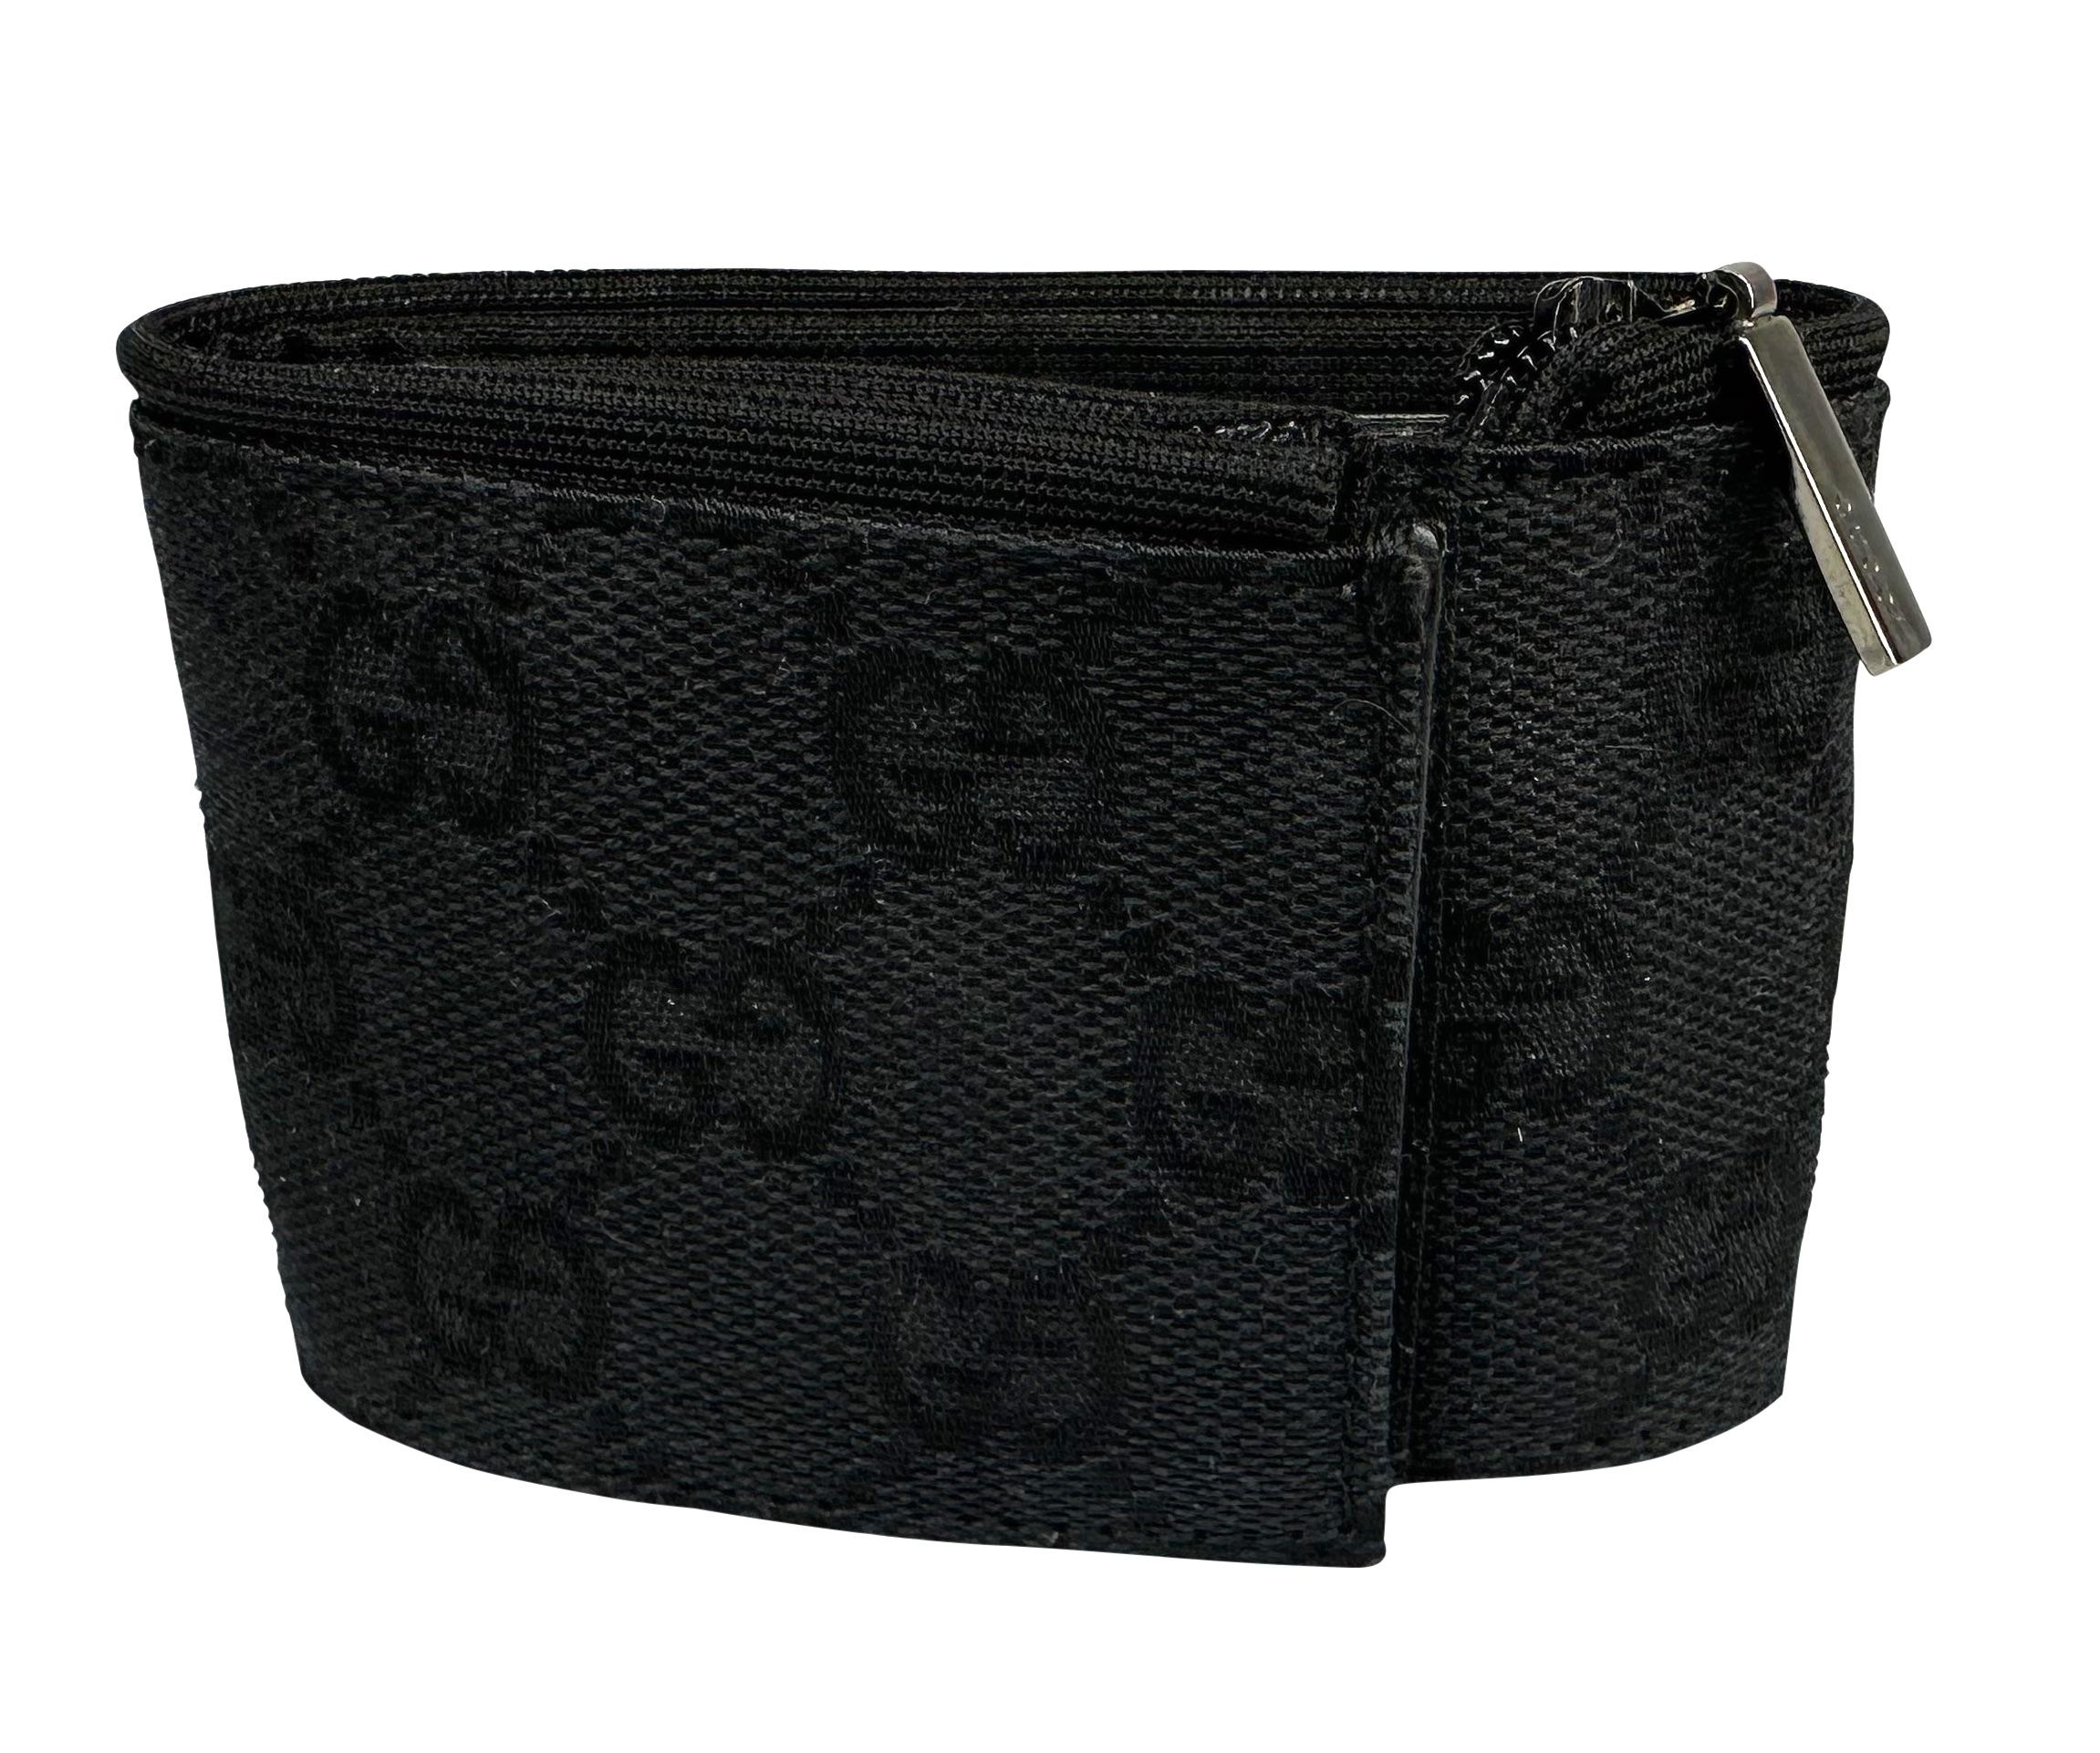 Presenting a black Gucci 'GG' monogram pouch cuff, designed by Tom Ford. From the early 2000s, this zip bracelet features a velcro closure and zip pocket just big enough to hold the absolute essentials, making it the perfect hands-free accessory.